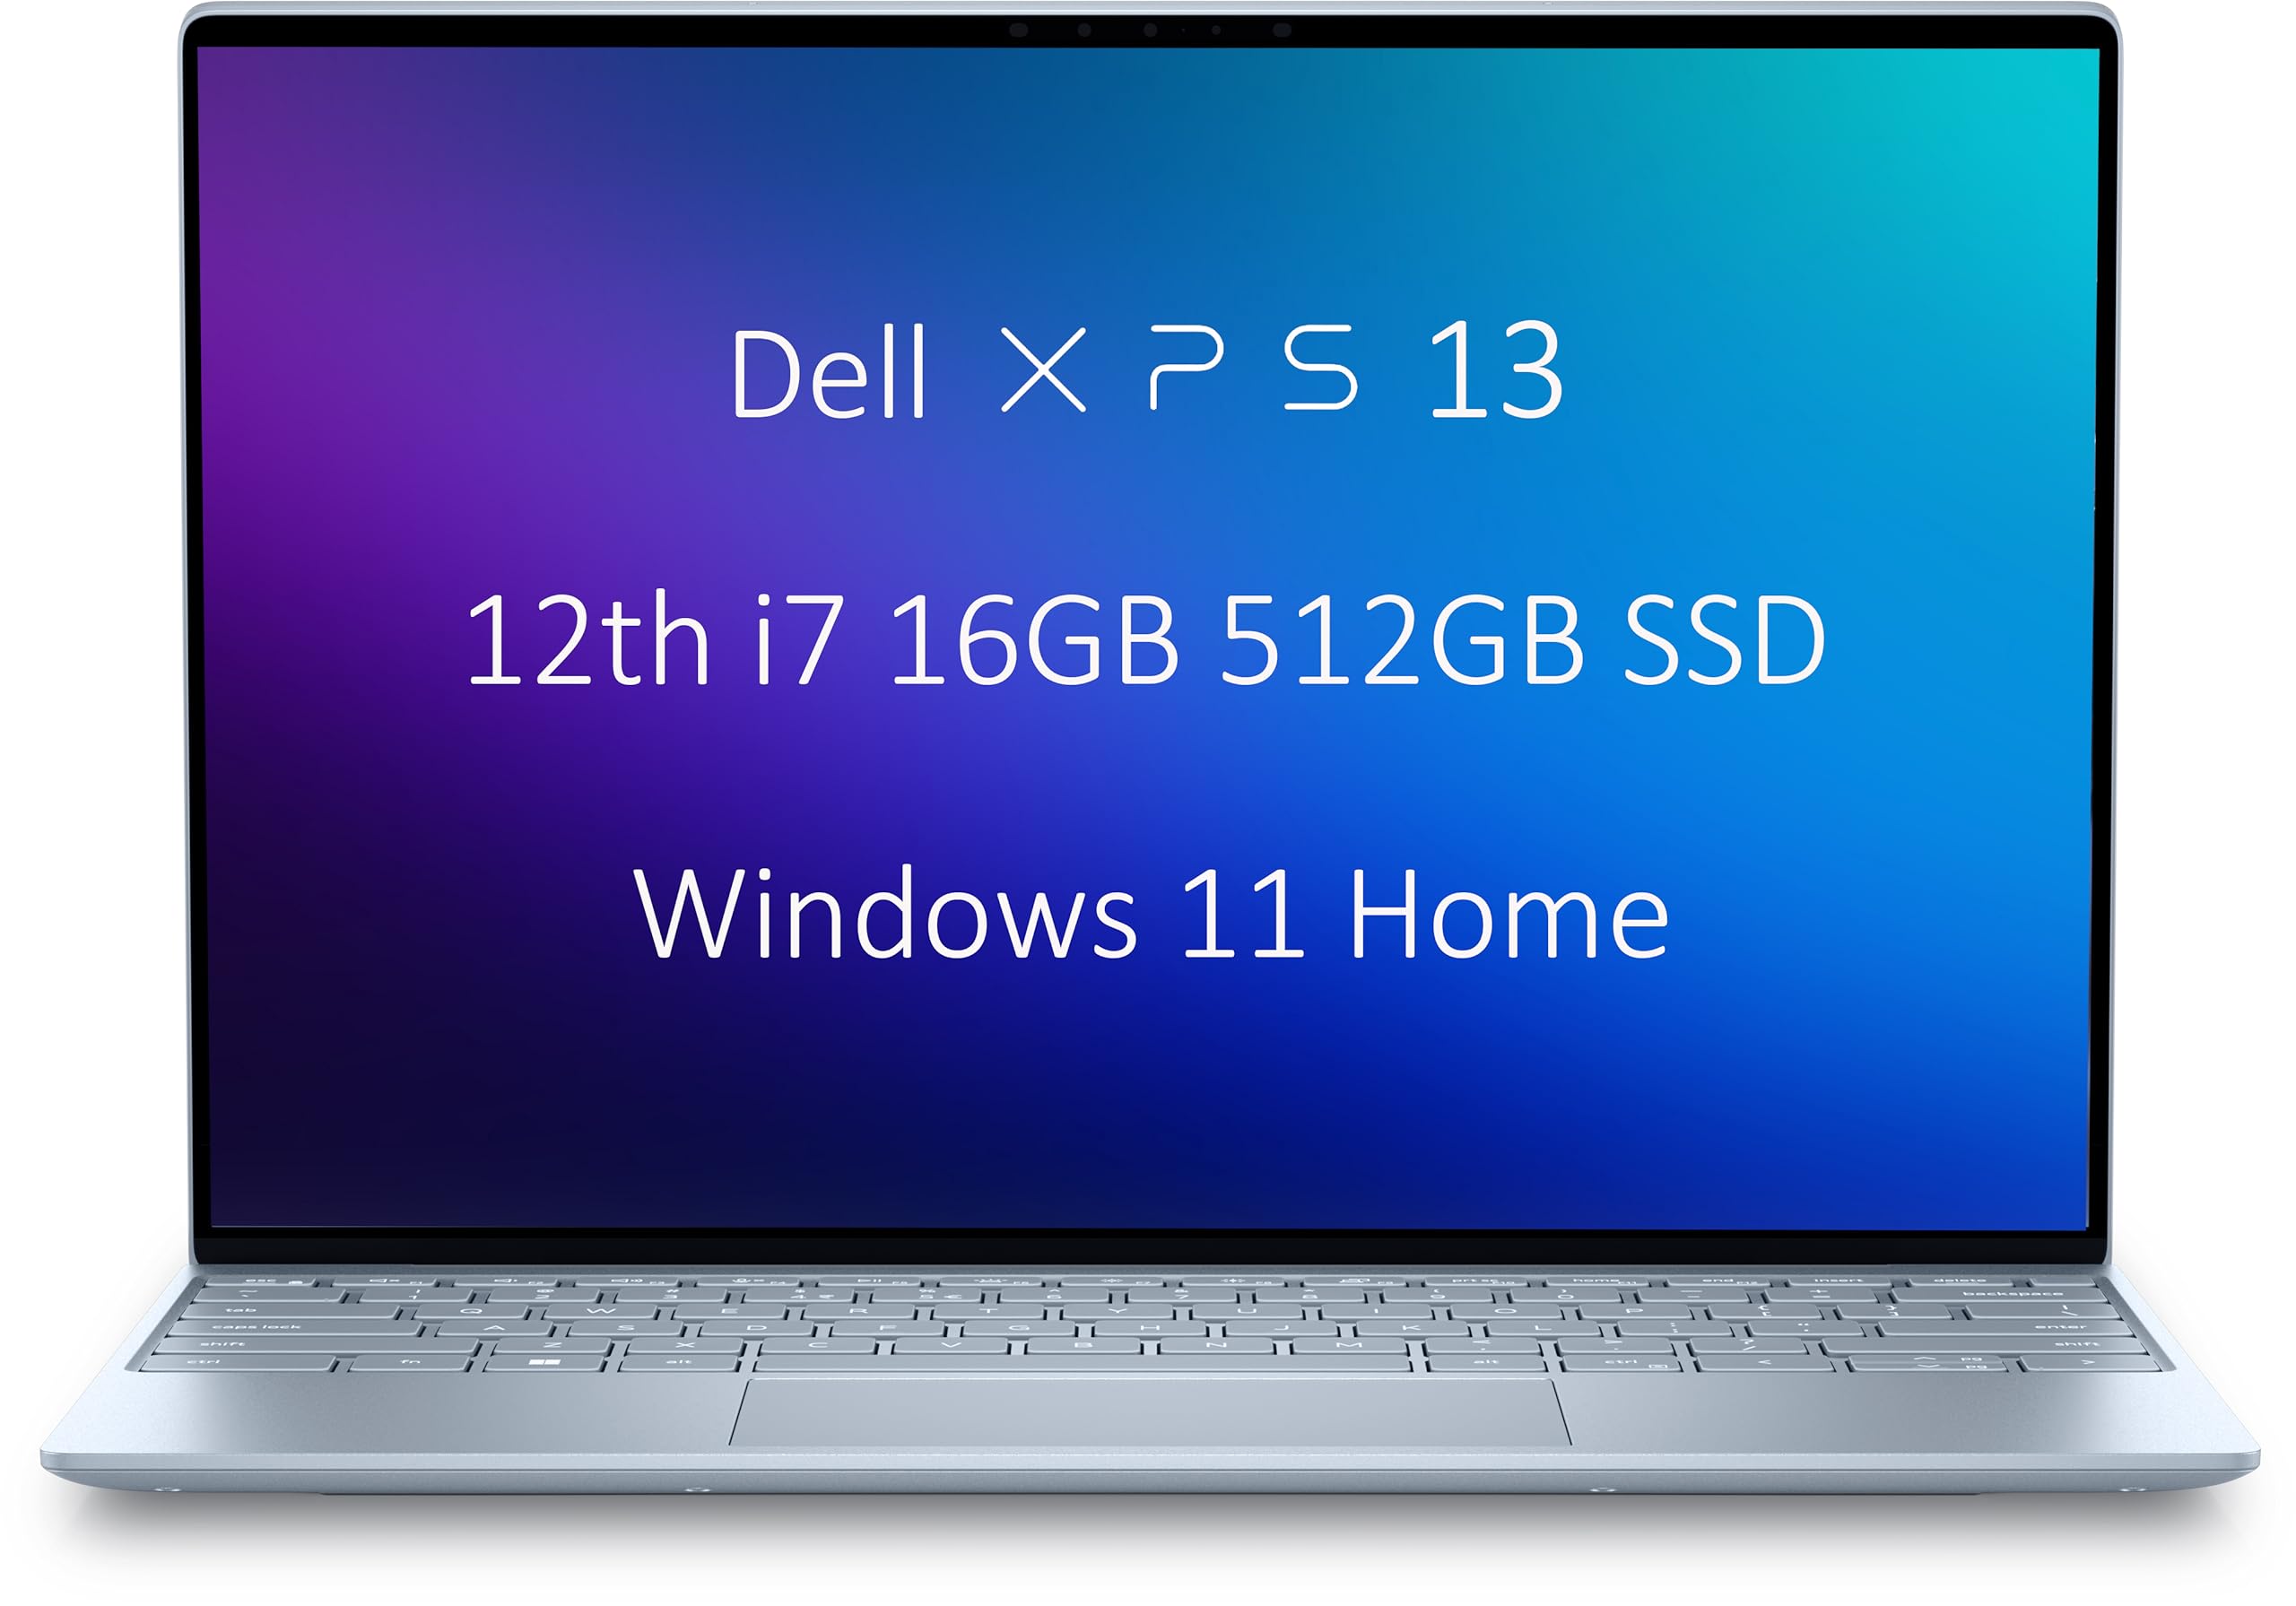 Dell XPS 13 startup screen